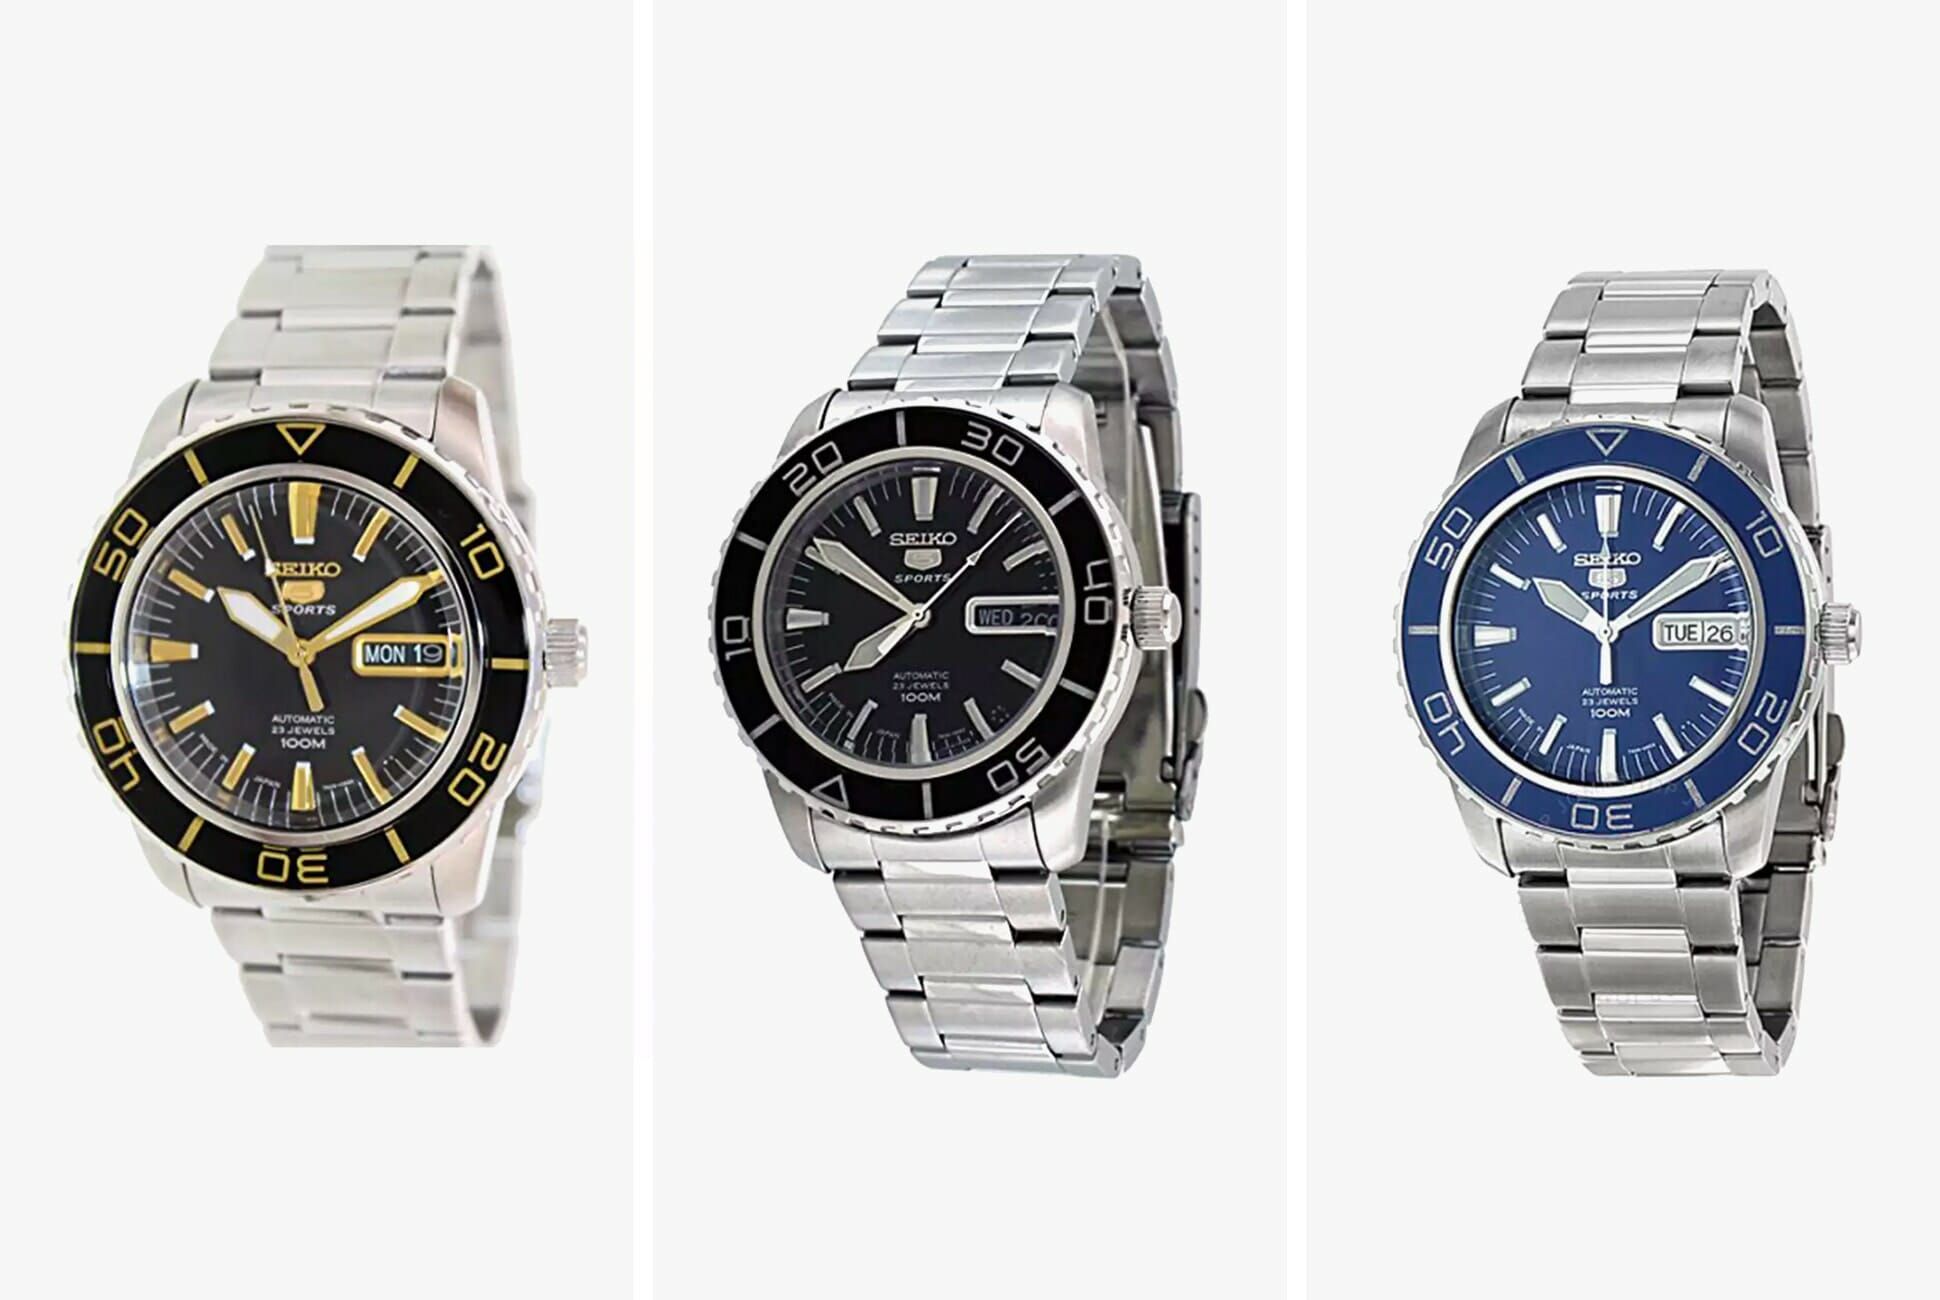 Get This Automatic Seiko 5 Dive Watch for $145